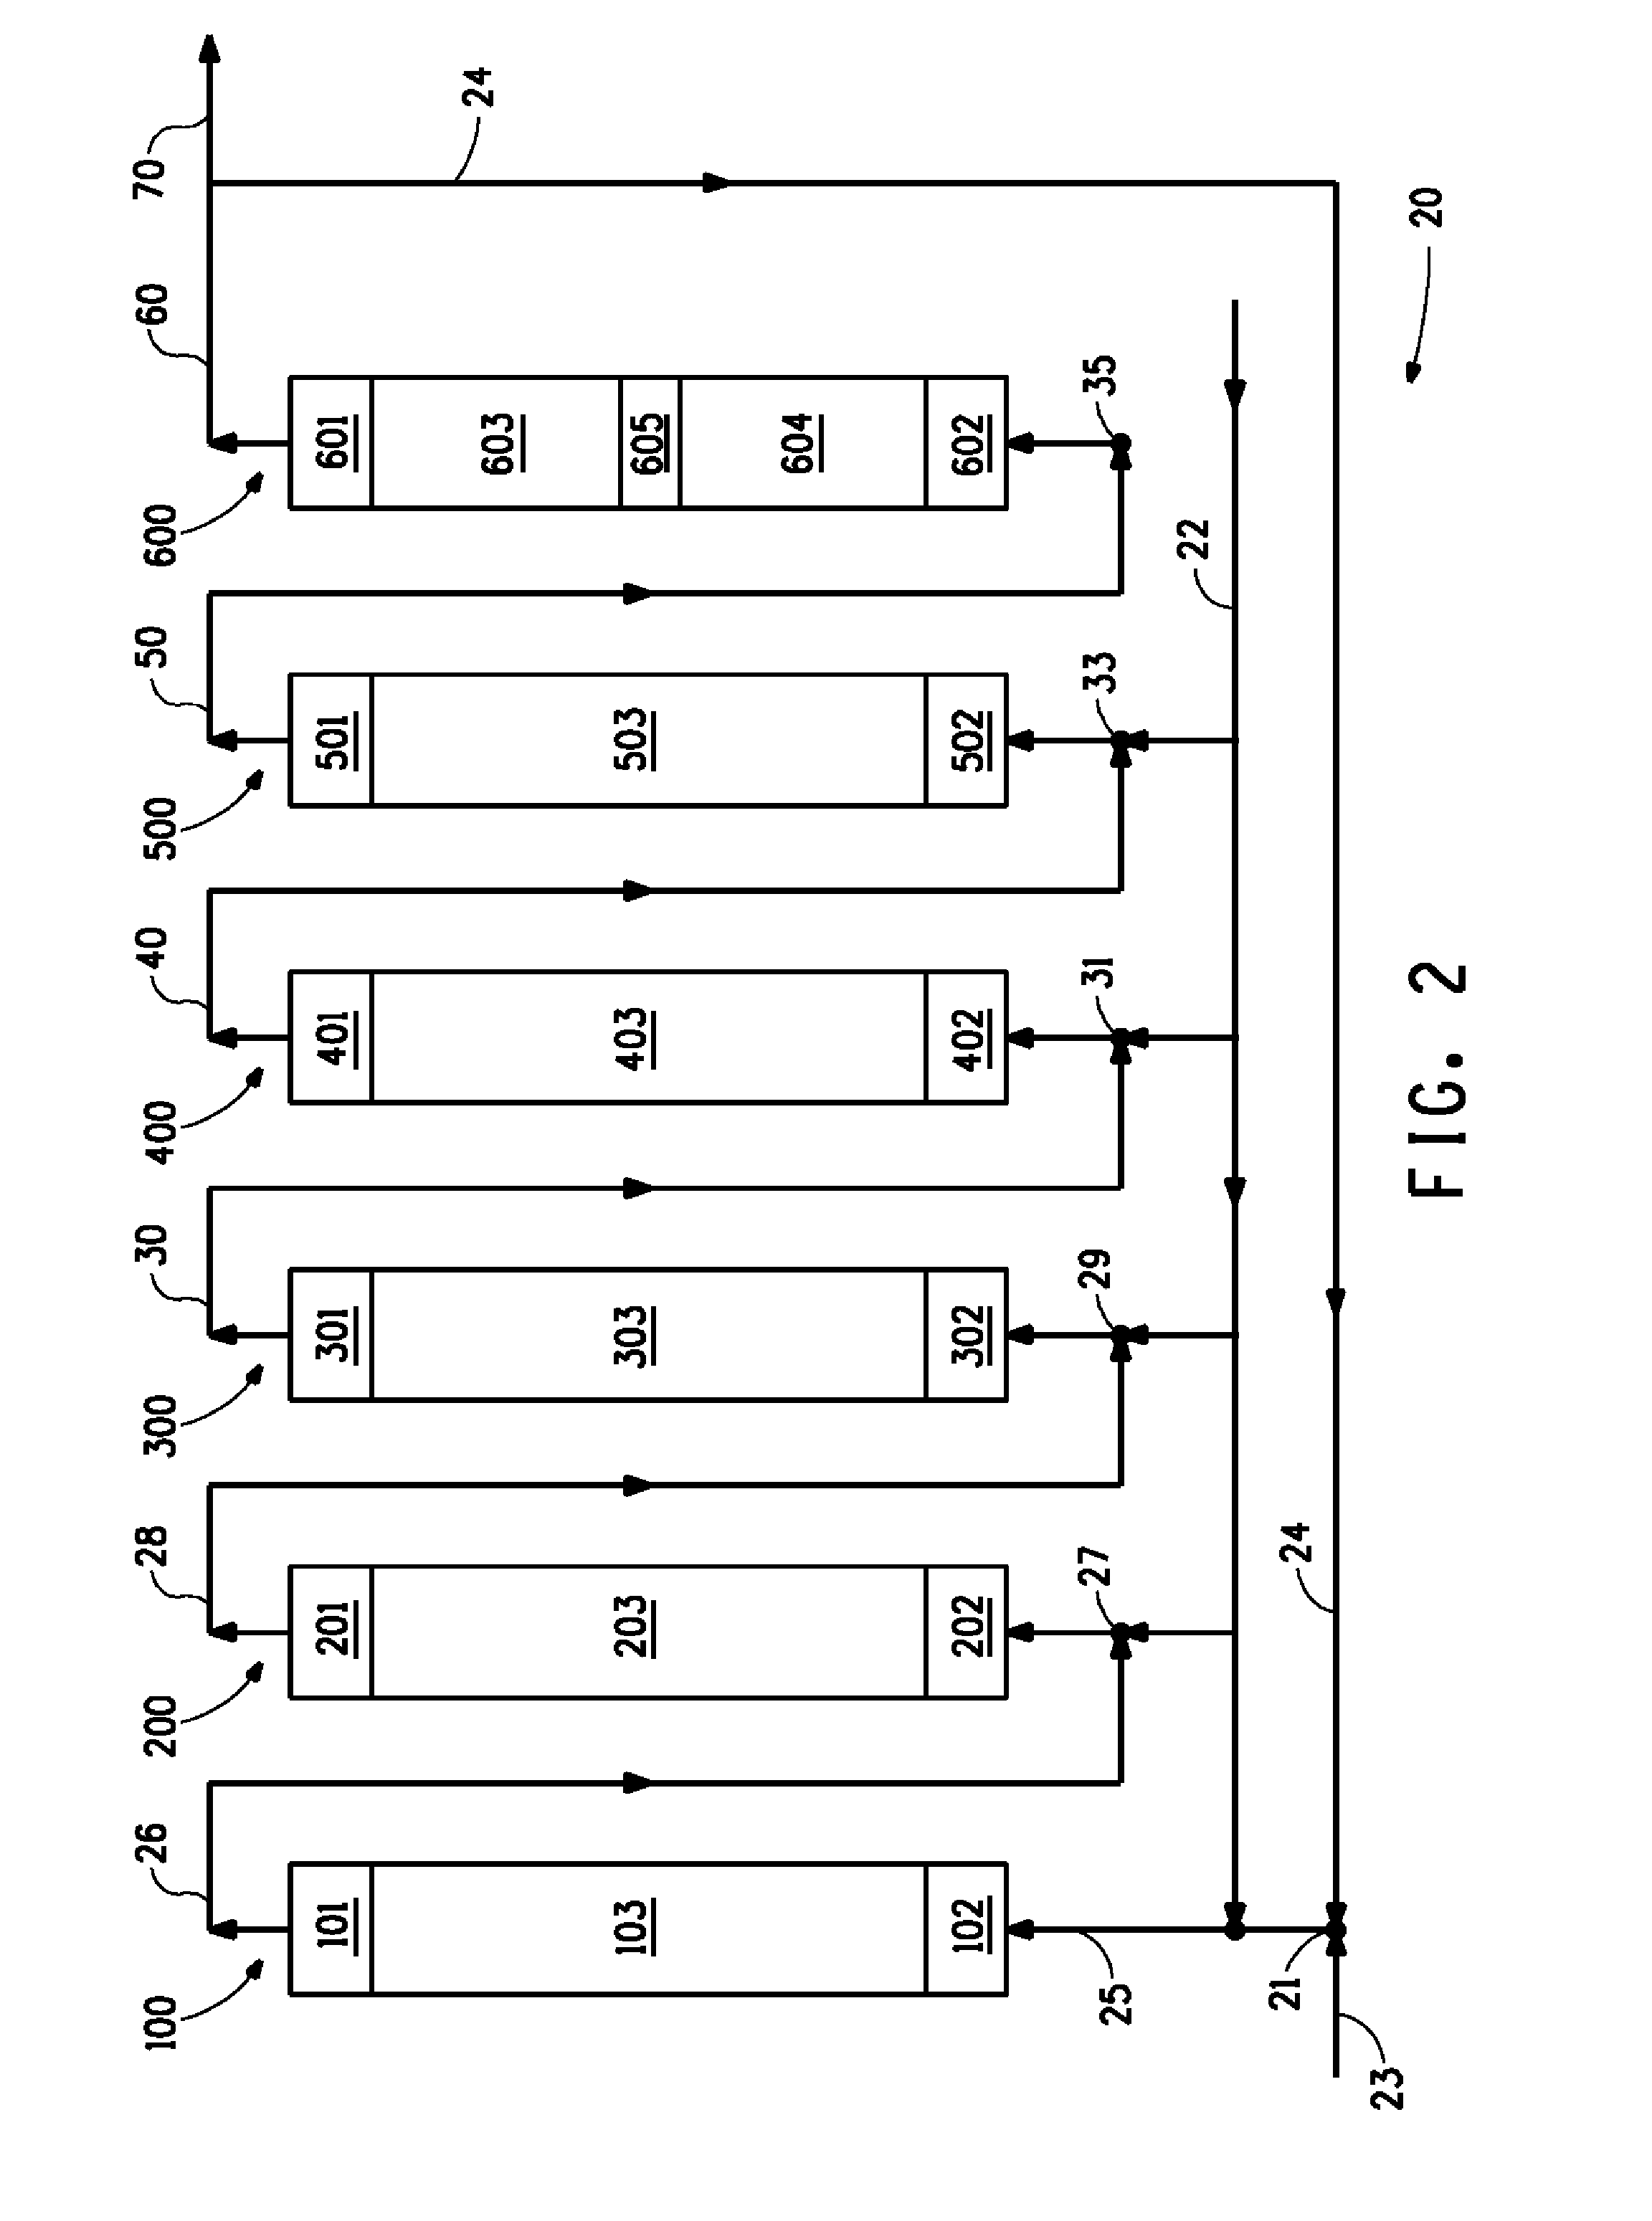 Process for improving cold flow properties and increasing yield of middle distillate feedstock through liquid full hydrotreating and dewaxing